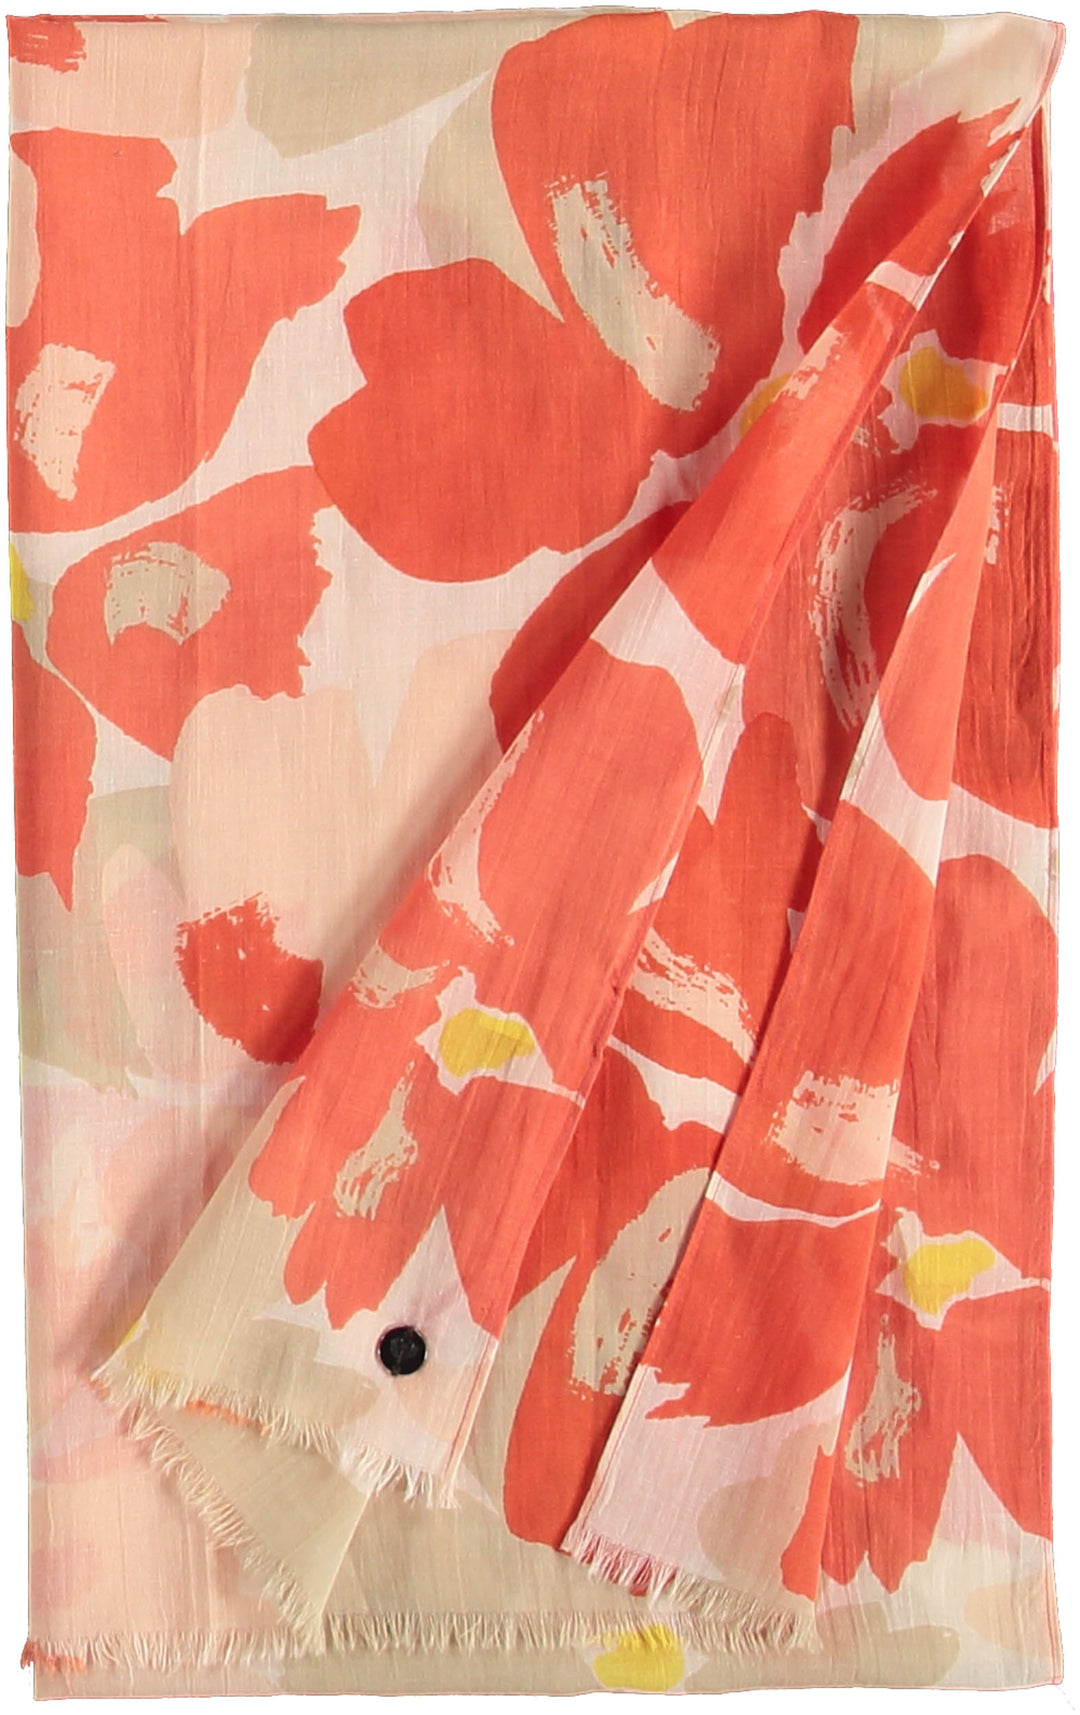 FRAAS Abstract Floral Cotton Print Scarf – FRAAS US